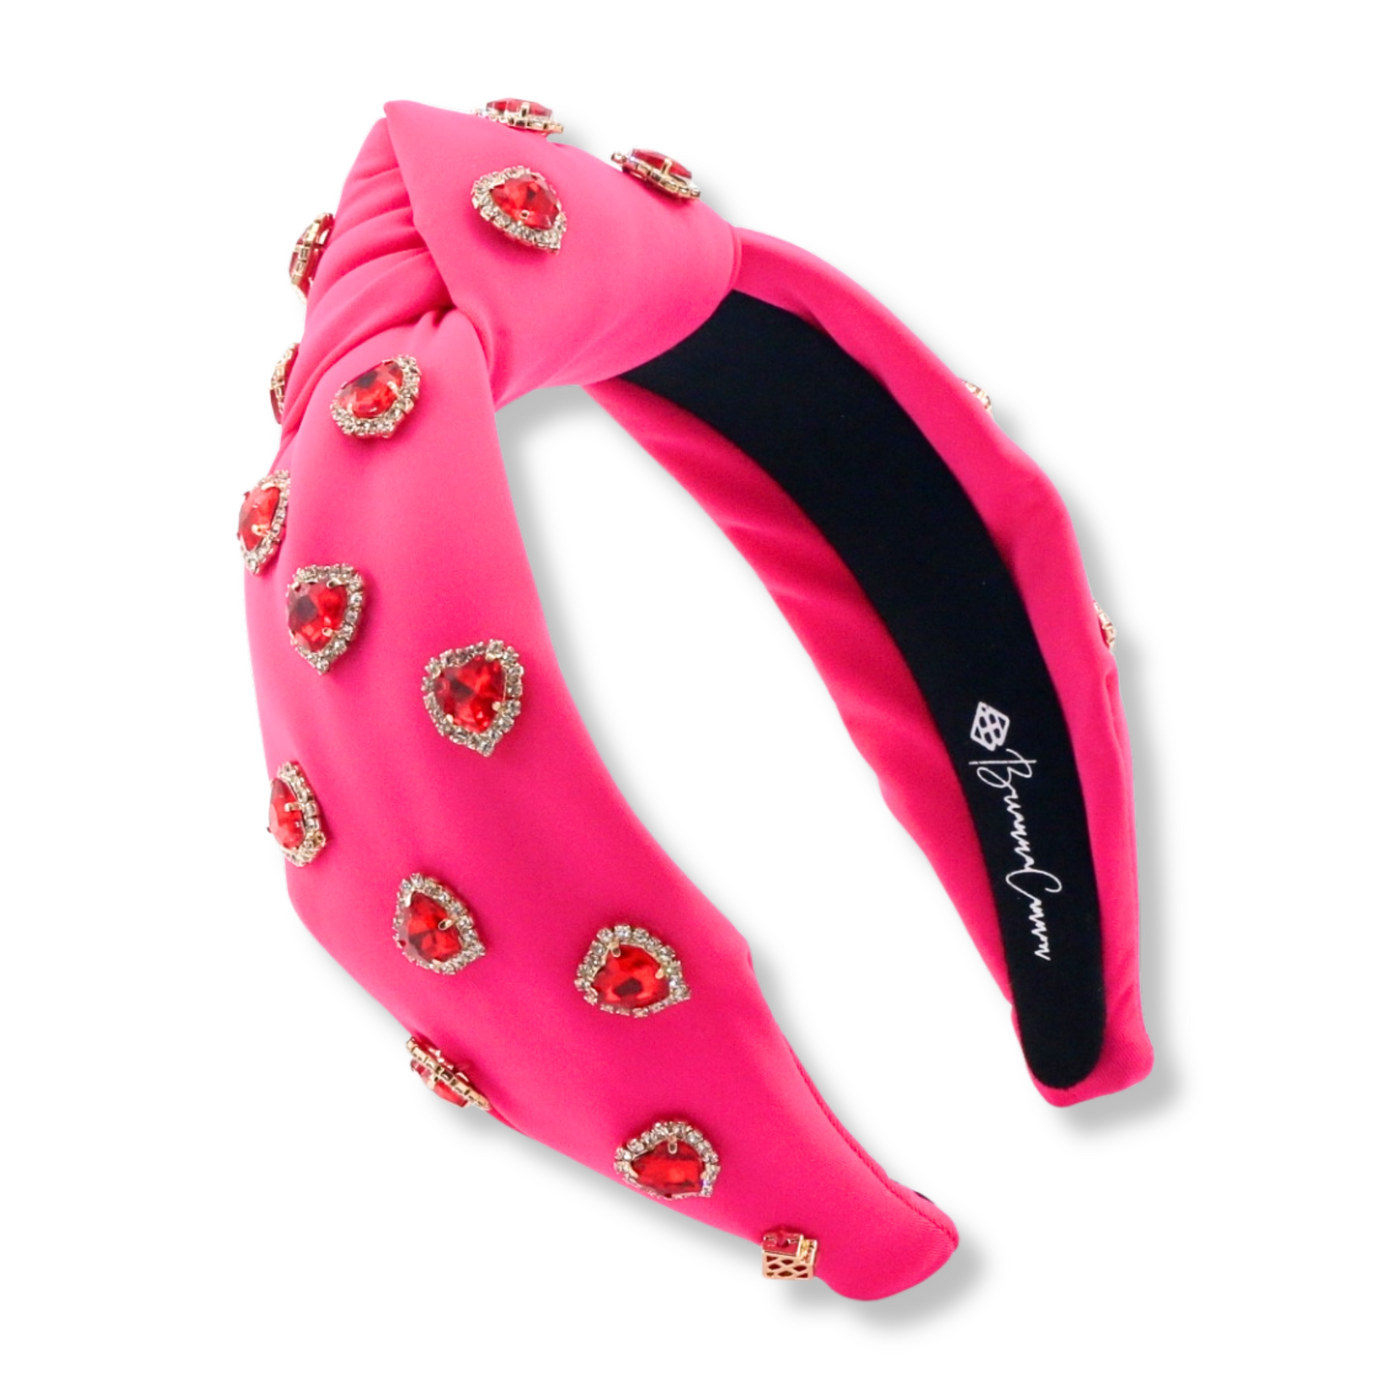 Adult Size Hot Pink Headband with Red Pavé Crystal Hearts